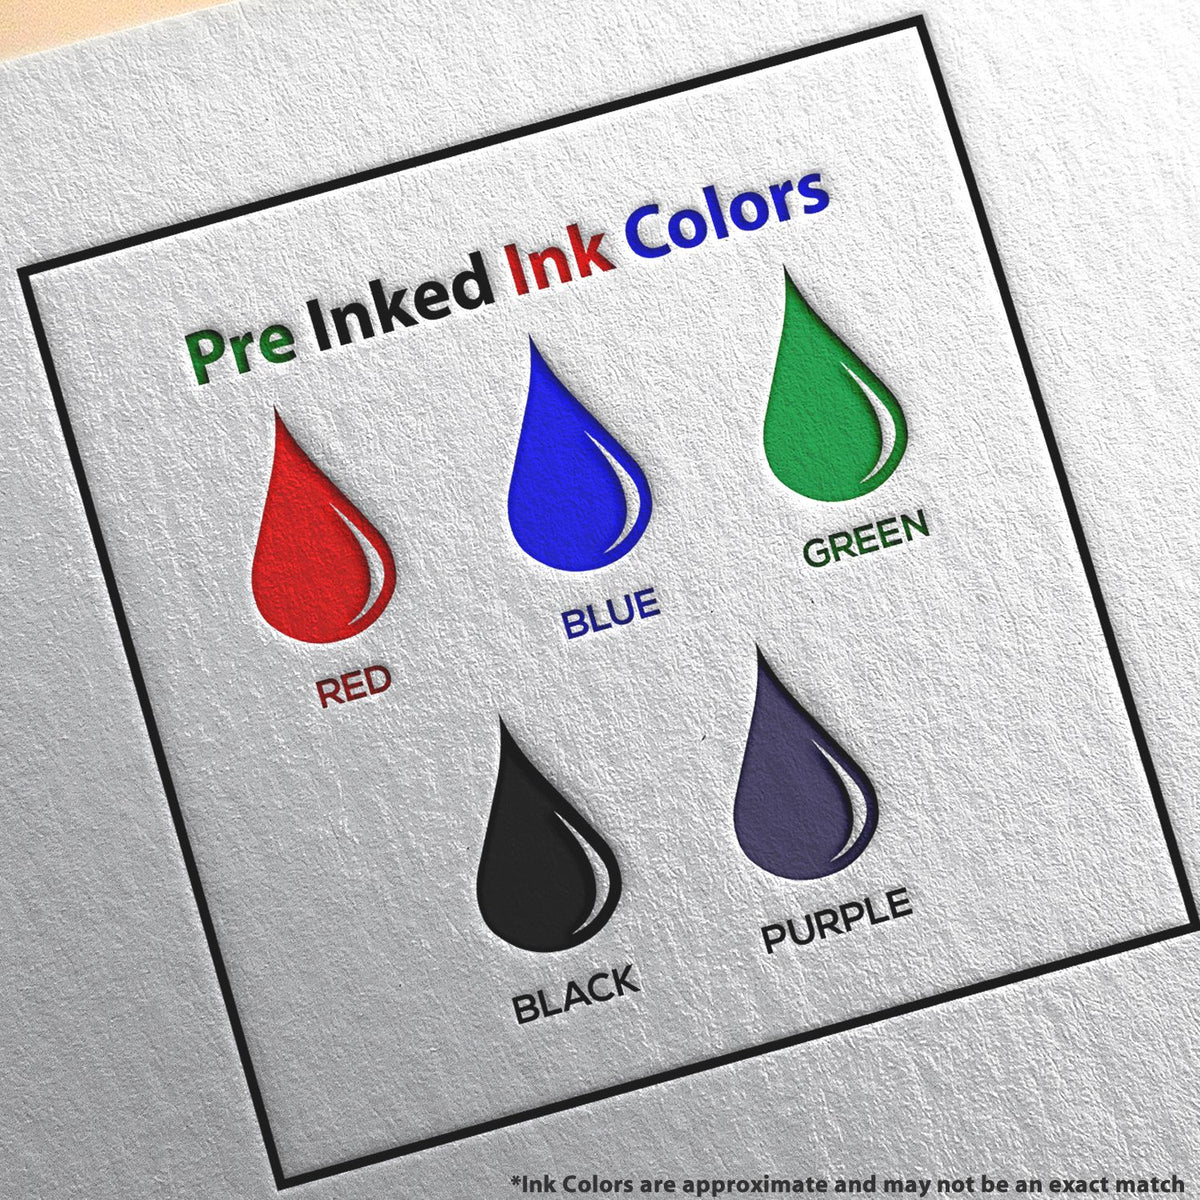 A picture showing the different ink colors or hues available for the PSI Florida Notary Stamp product.